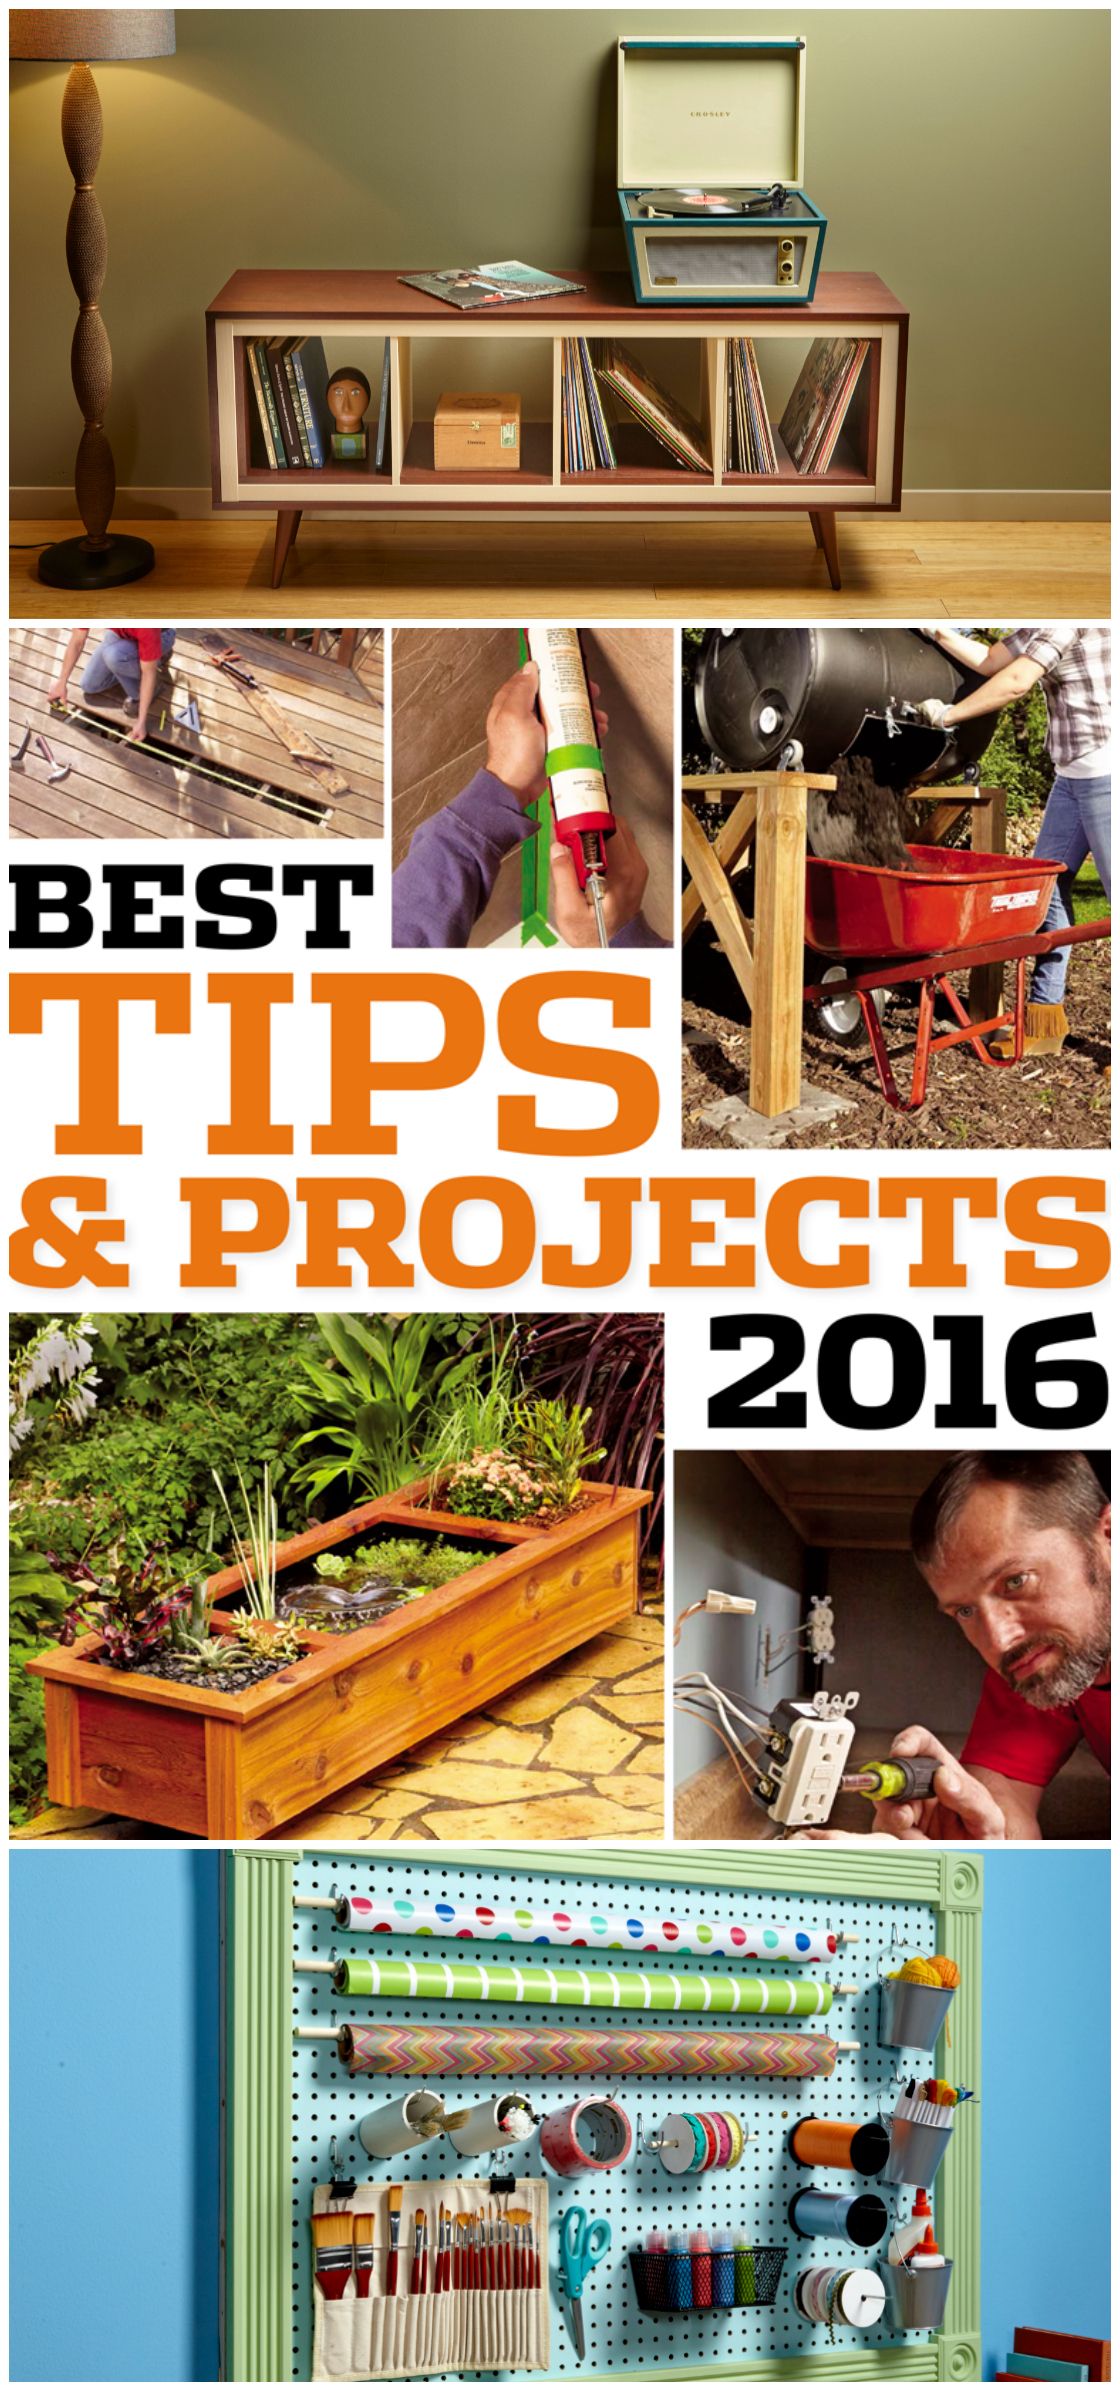 The Top Projects On Homeowner To-Do Lists